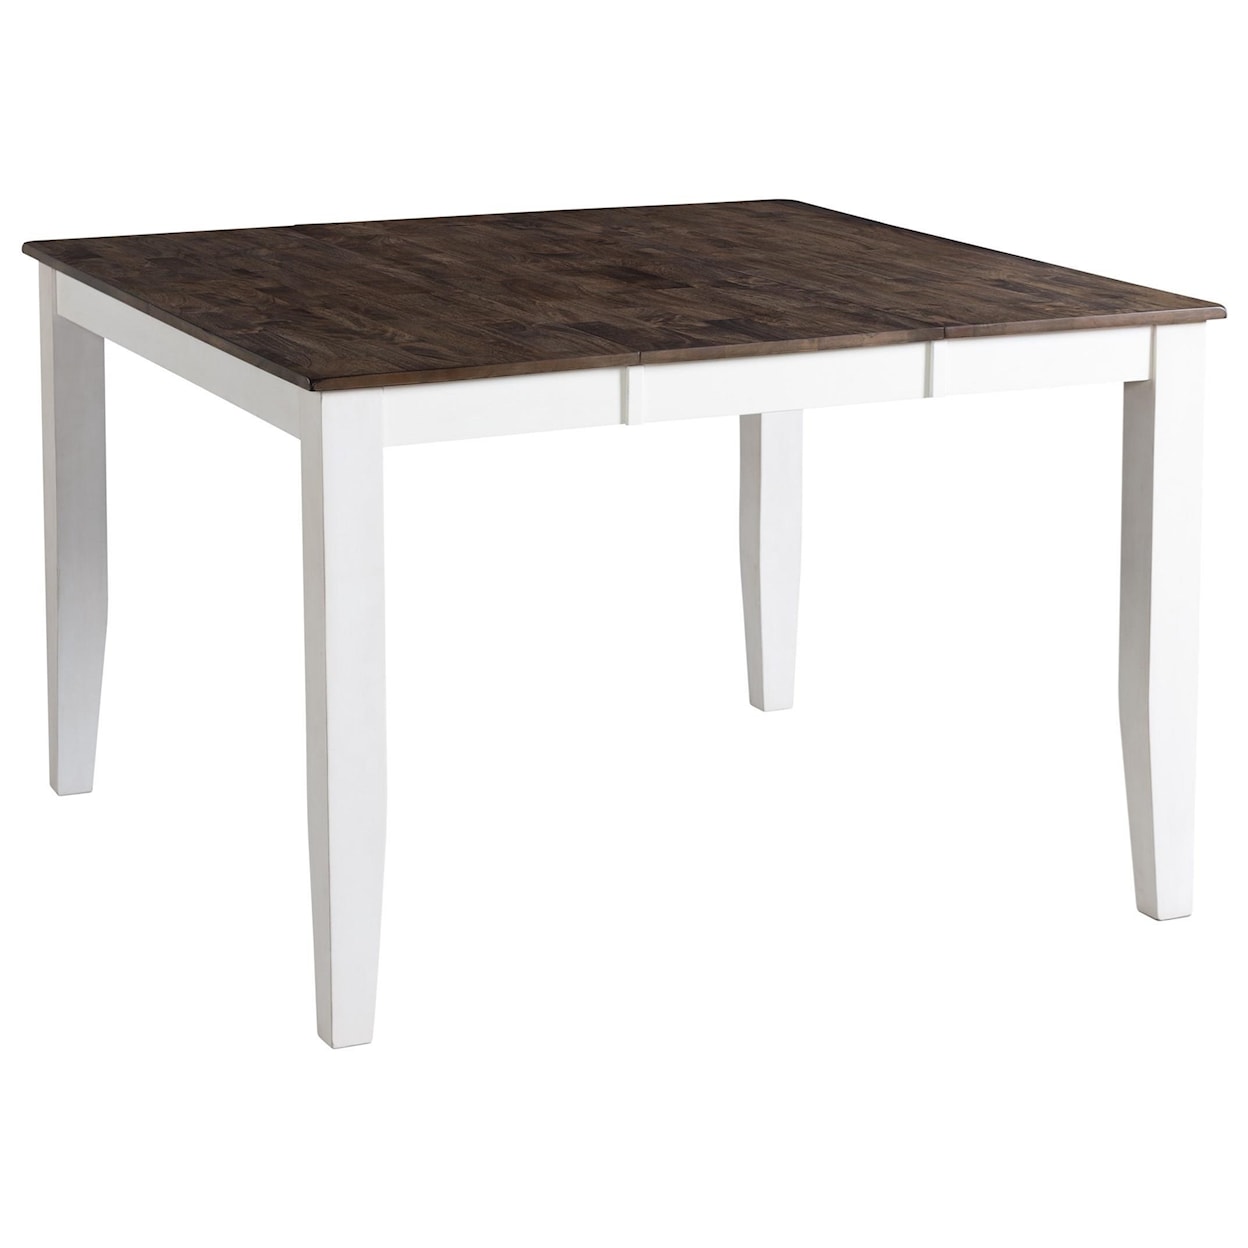 Intercon Kona Gathering Table with Butterfly Leaf